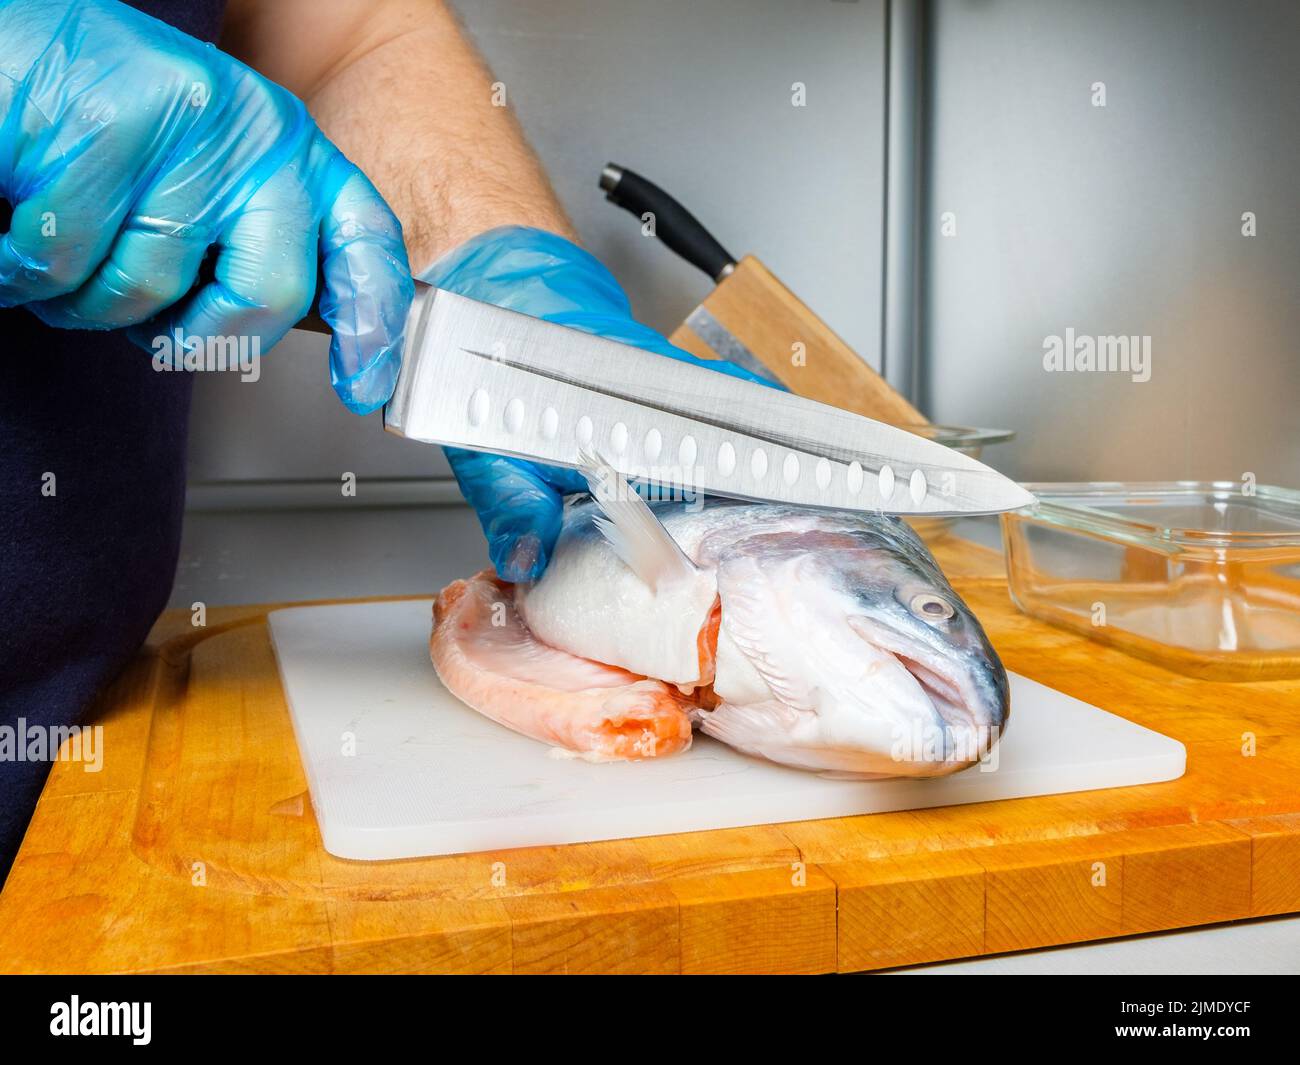 The gloved hands of the cook cut off the salmon's head with a knife. Stock Photo